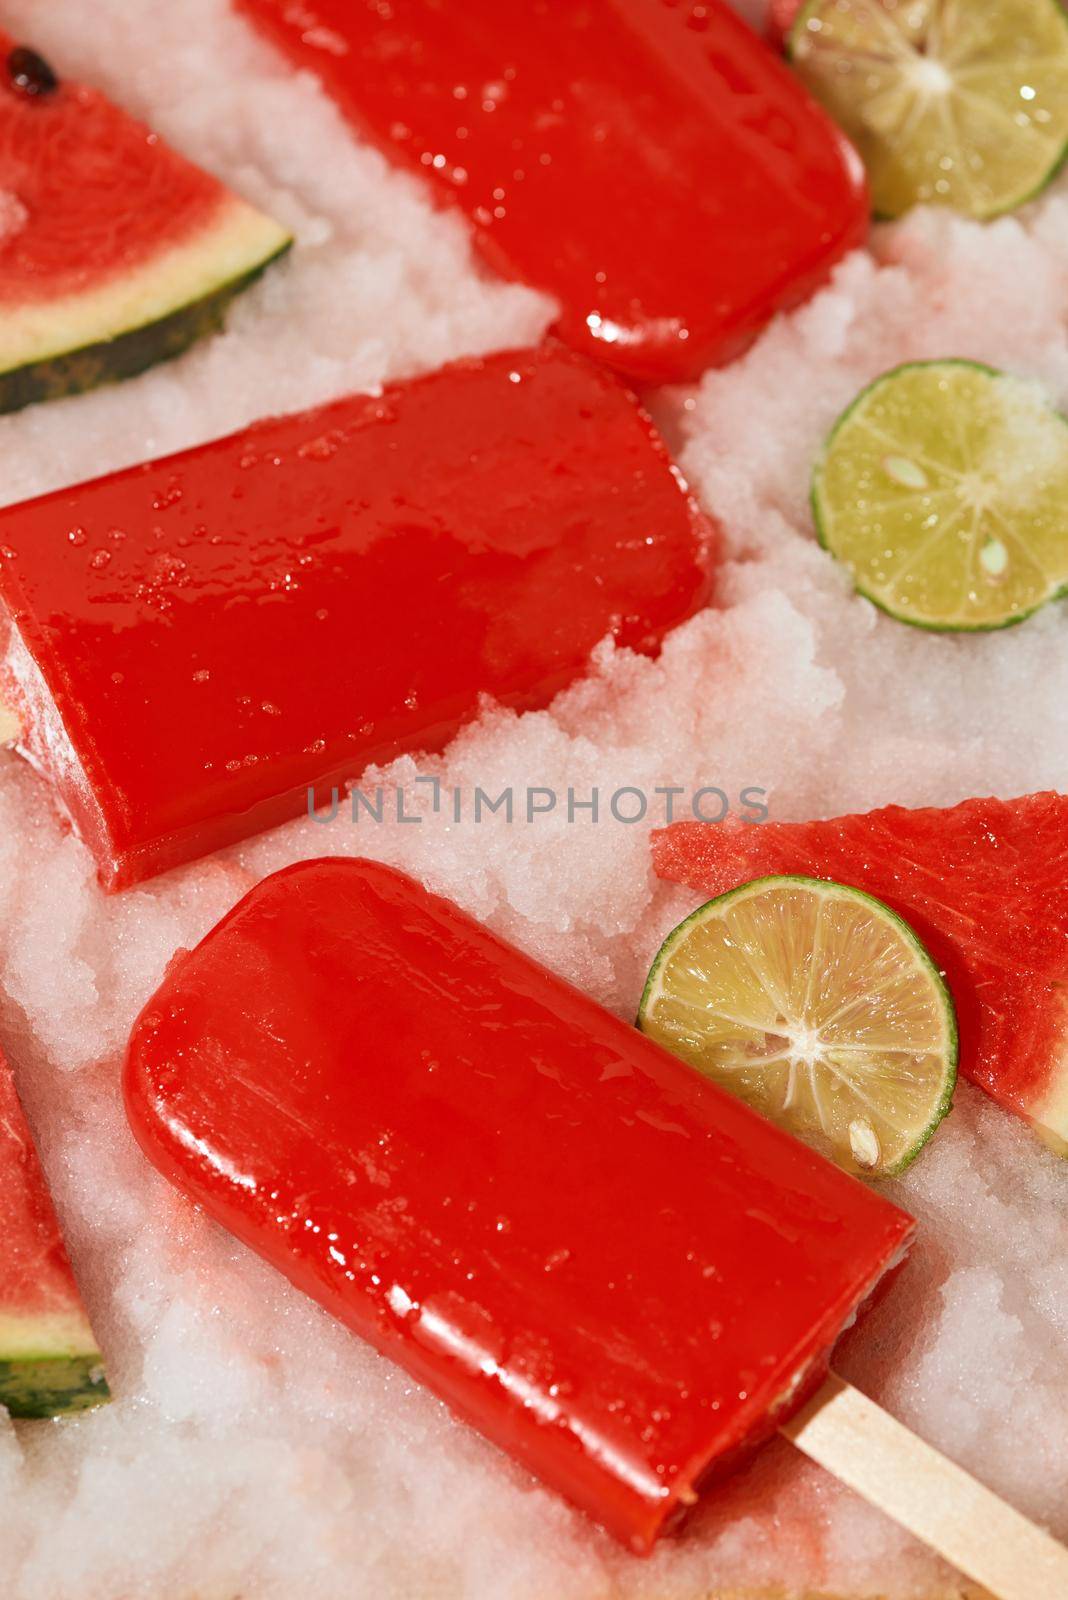 Watermelon popsicle and sliced lemon on ice tray